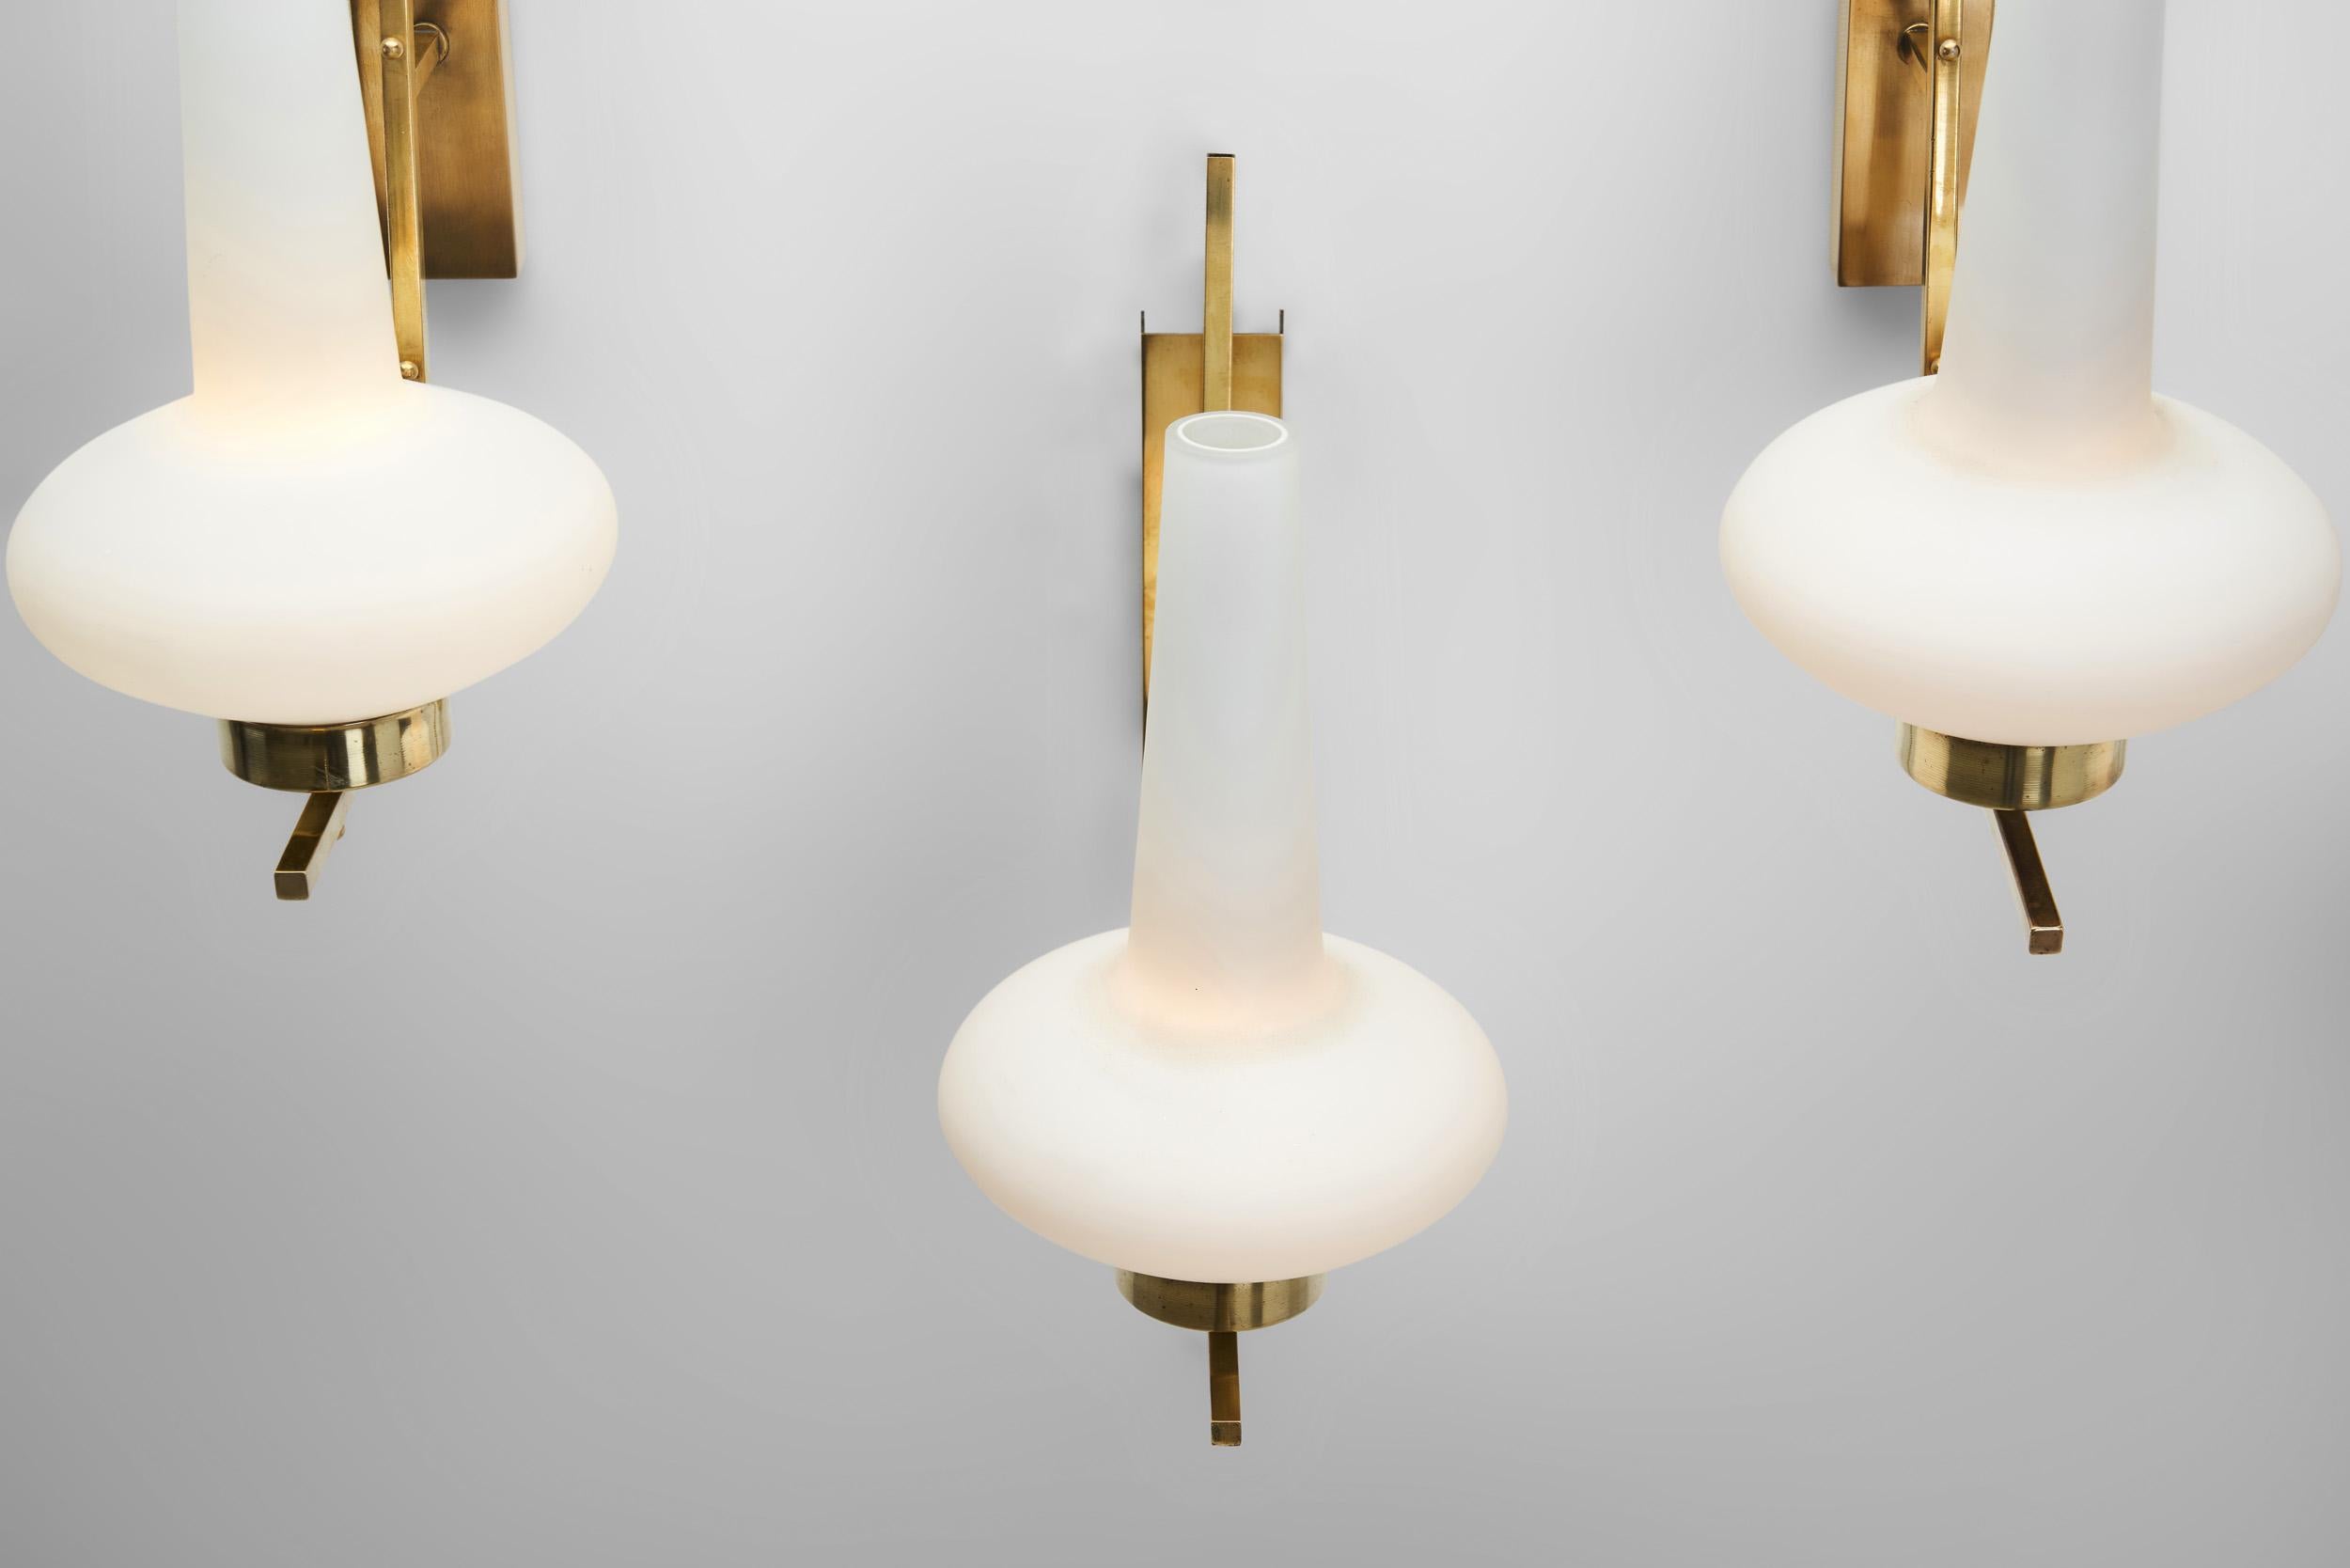 Italian Mid-Century Modern Brass Wall Lamps, Italy 1950s For Sale 4